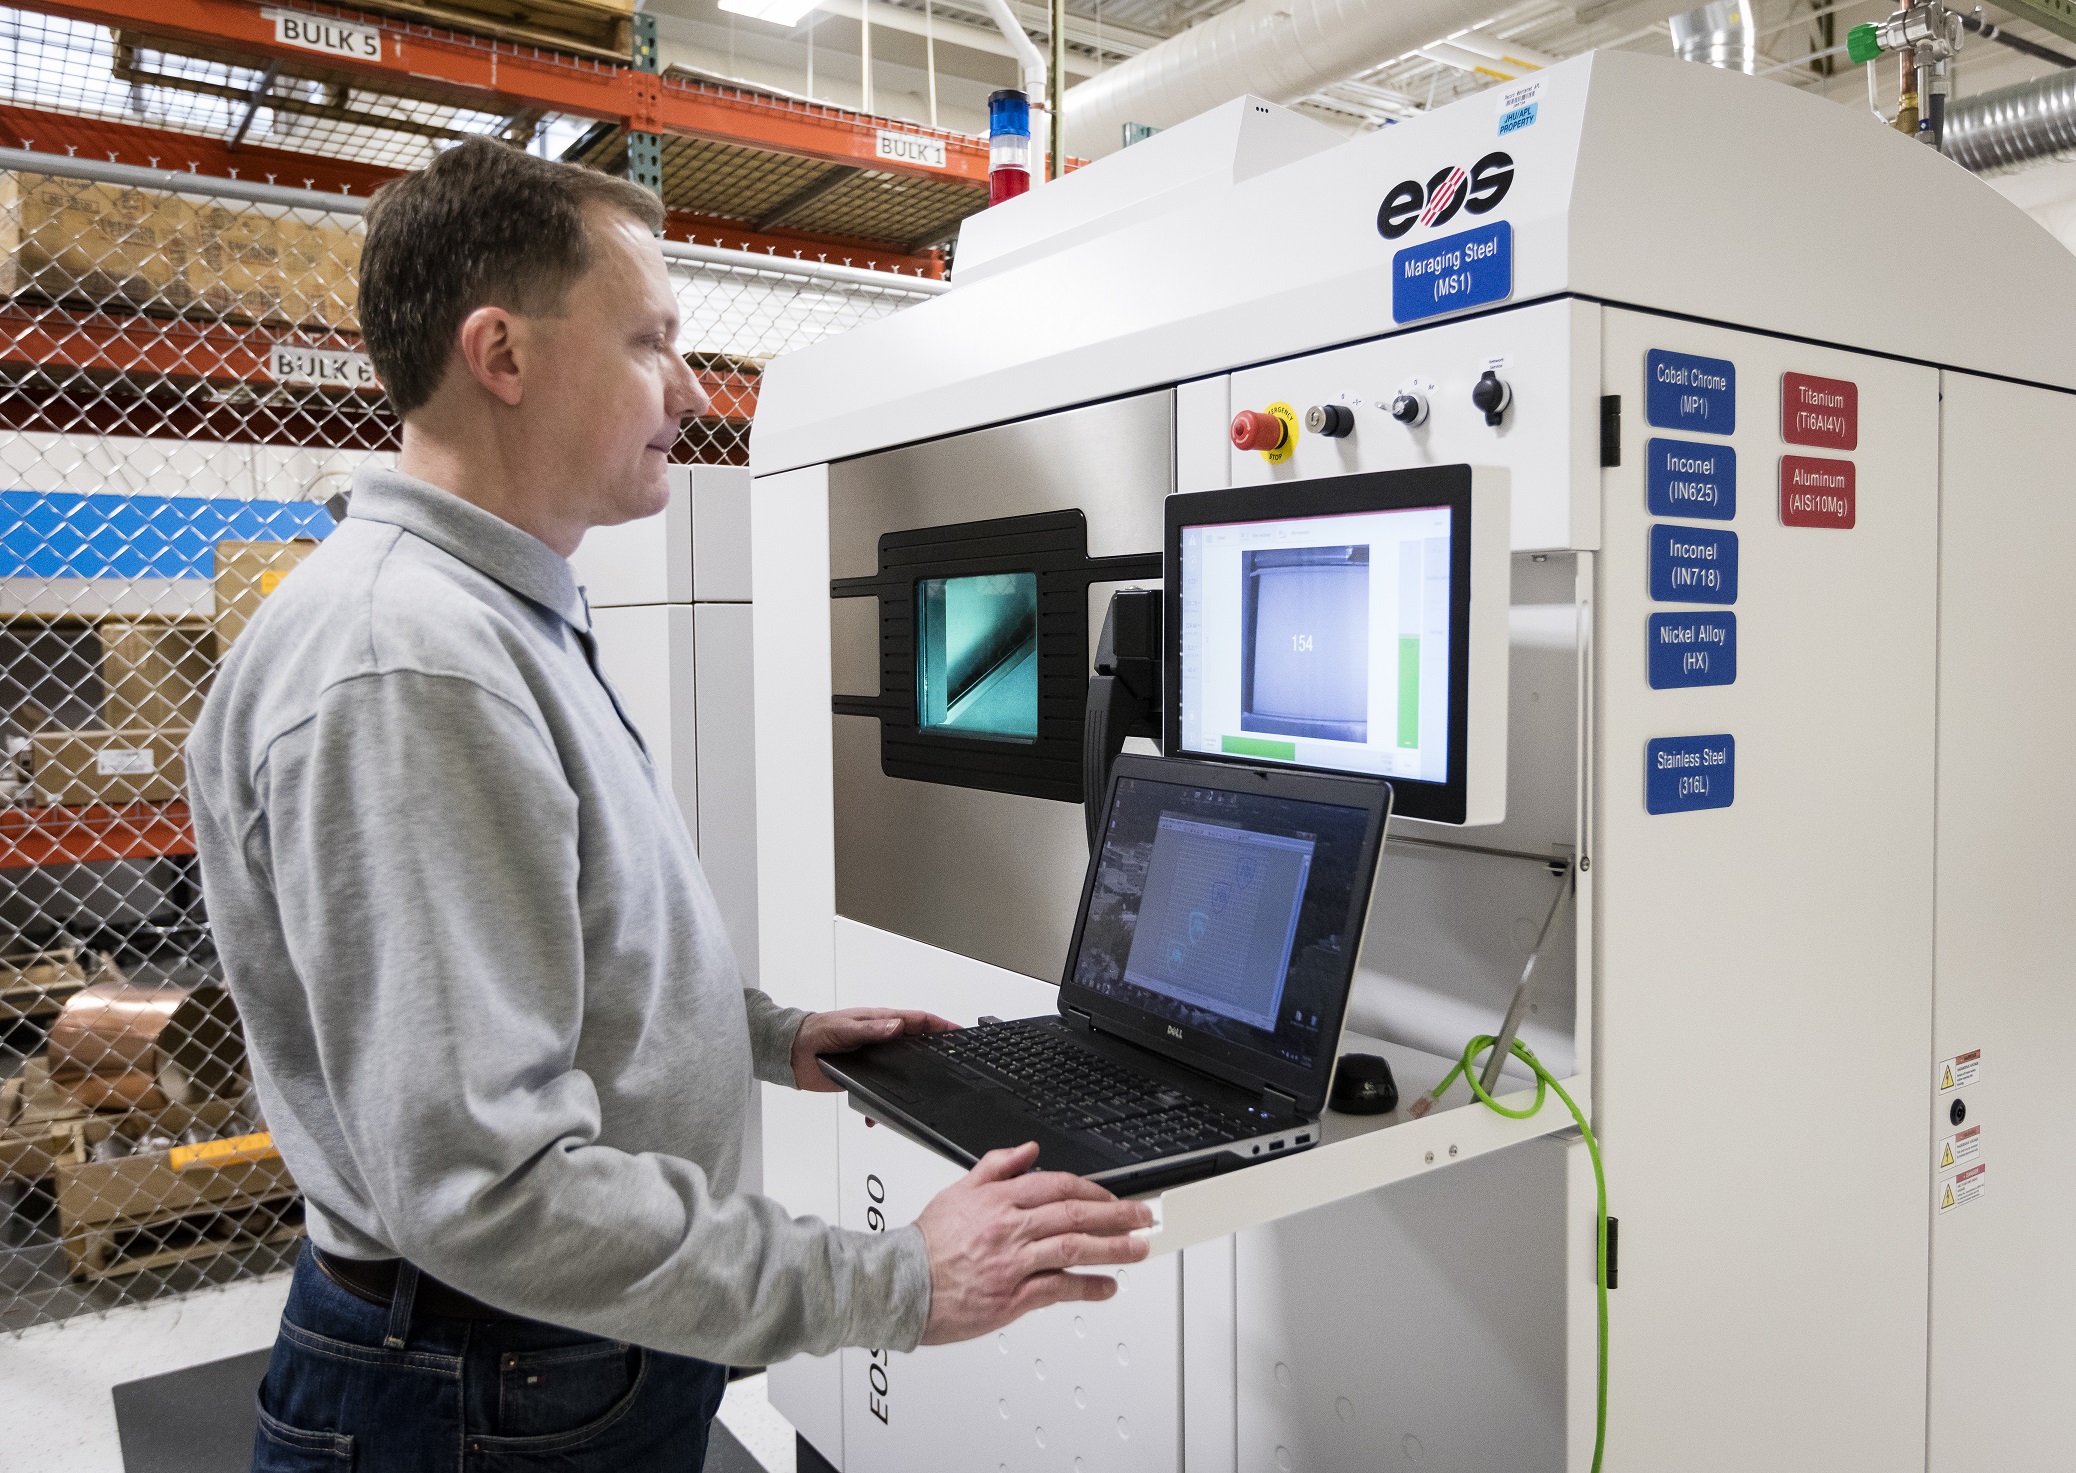 AM engineer John Slotwinski checks the progress of complex metal parts being made inside APL’s metal powder bed fusion additive manufacturing system. Photo courtesy JHU/APL.